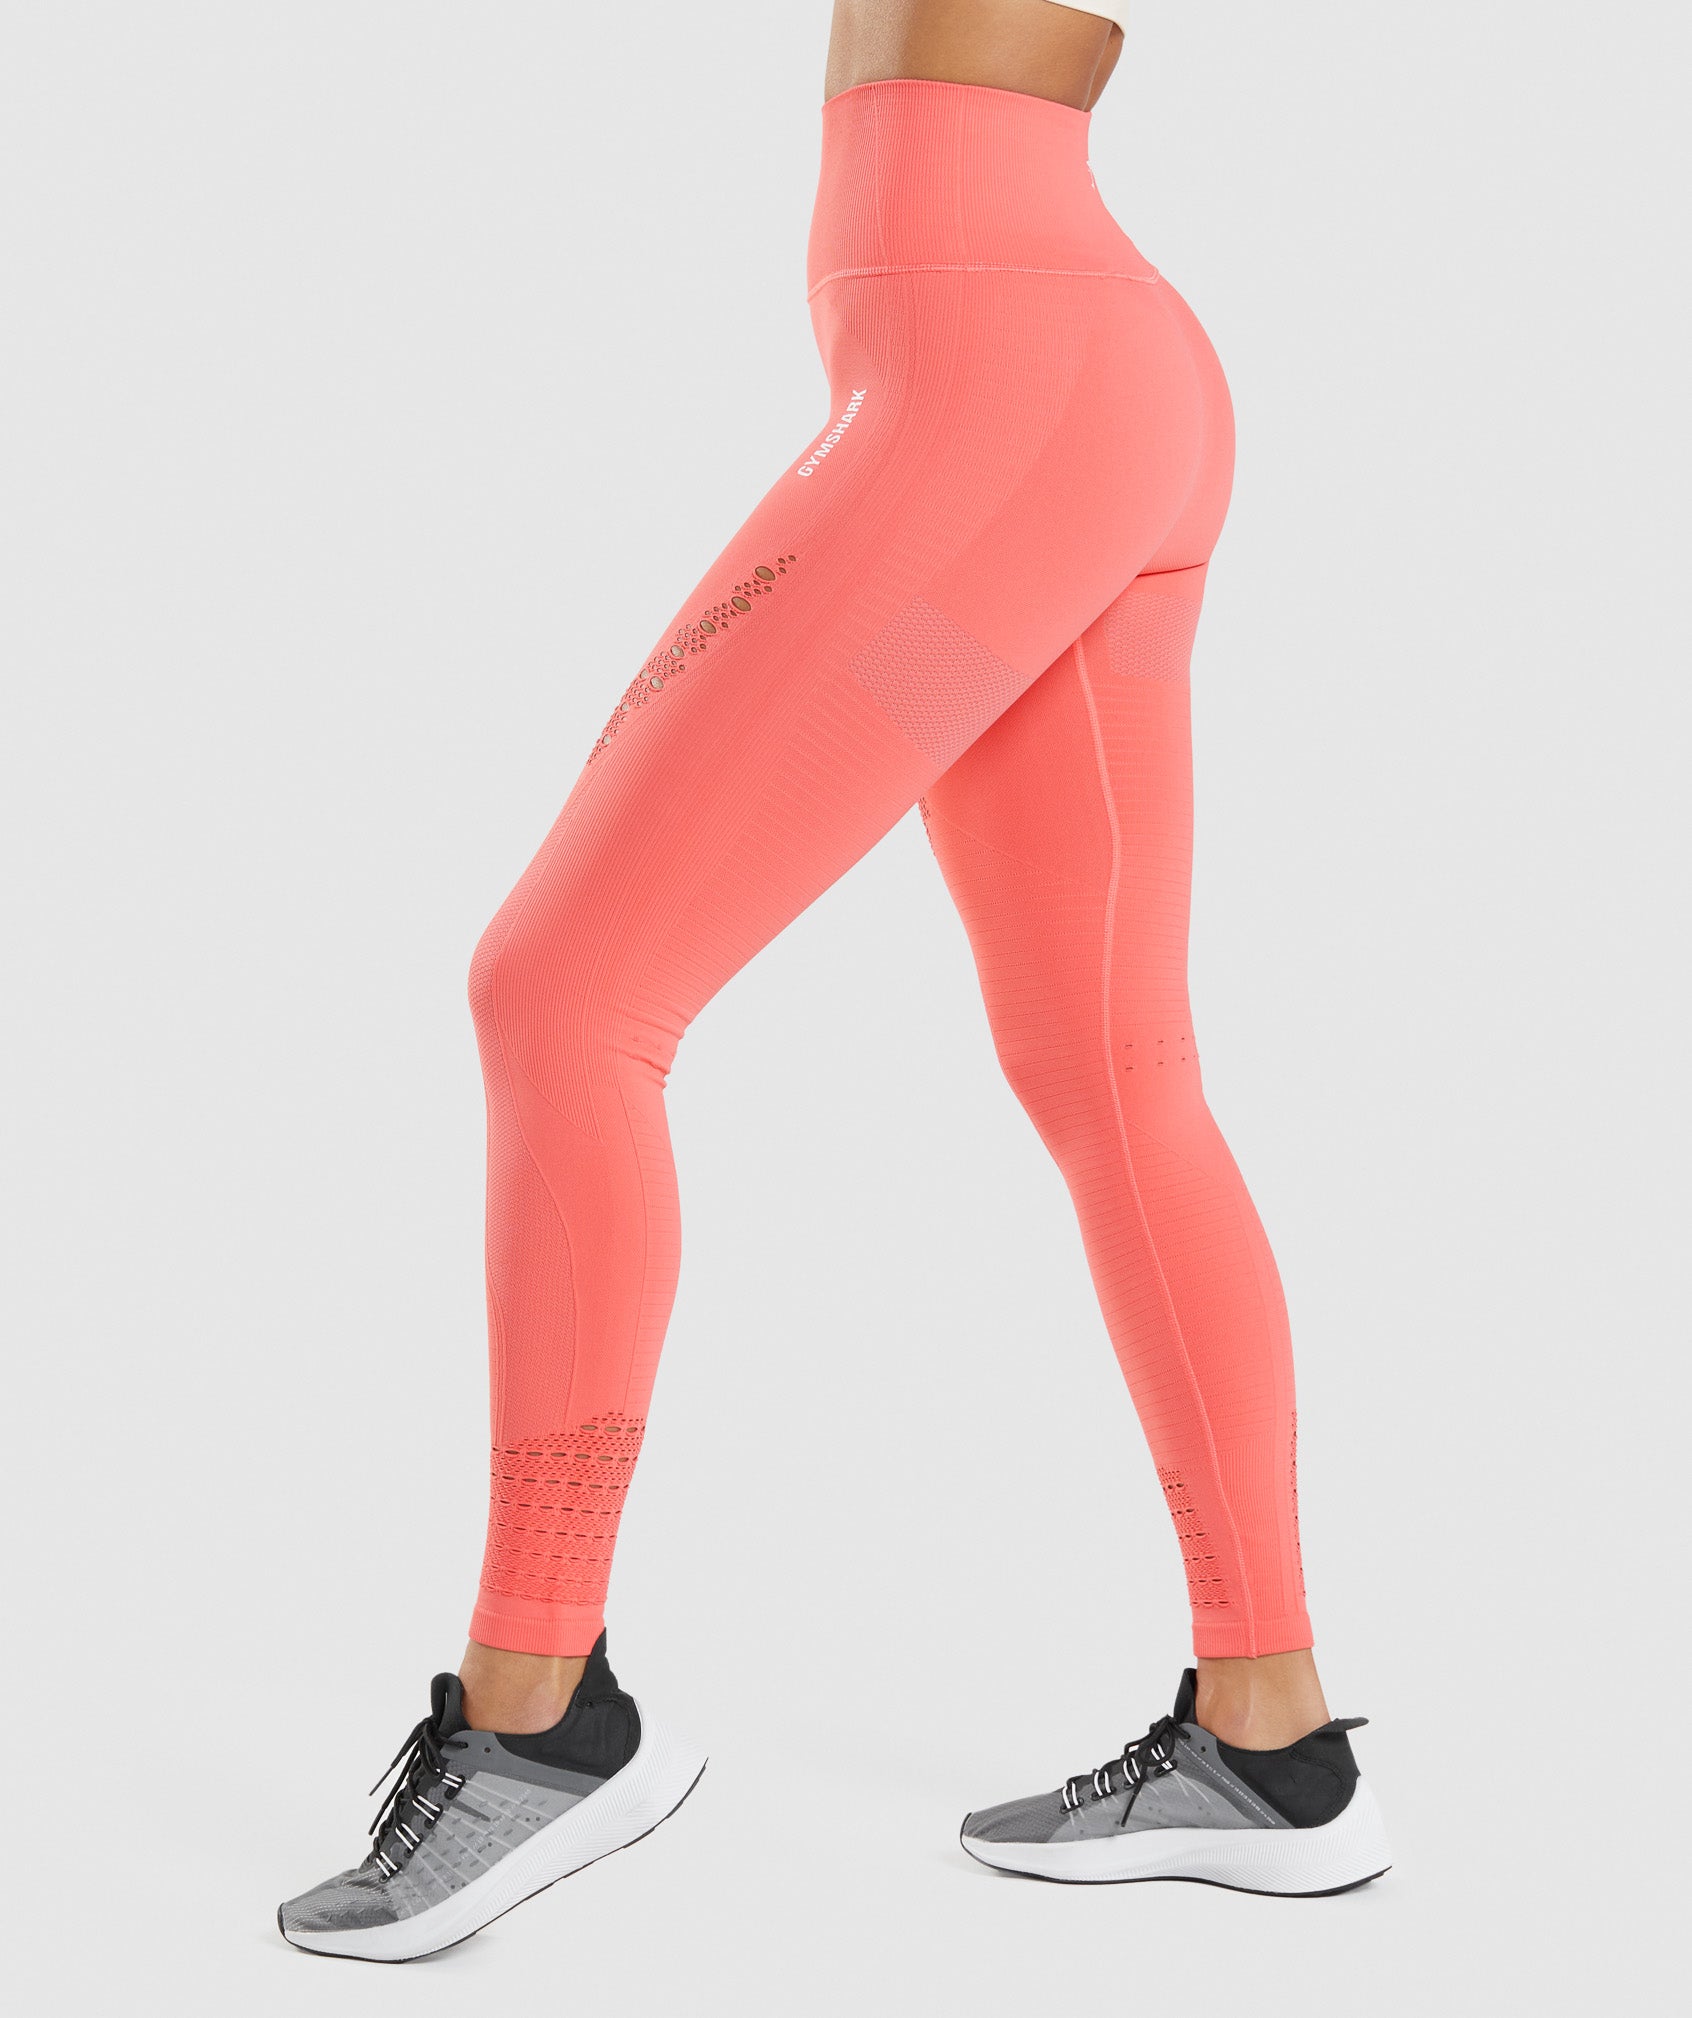 Crivit Black/Pink Sustainably Dyed Ladies' Seamless Athletic Leggings - L -  New